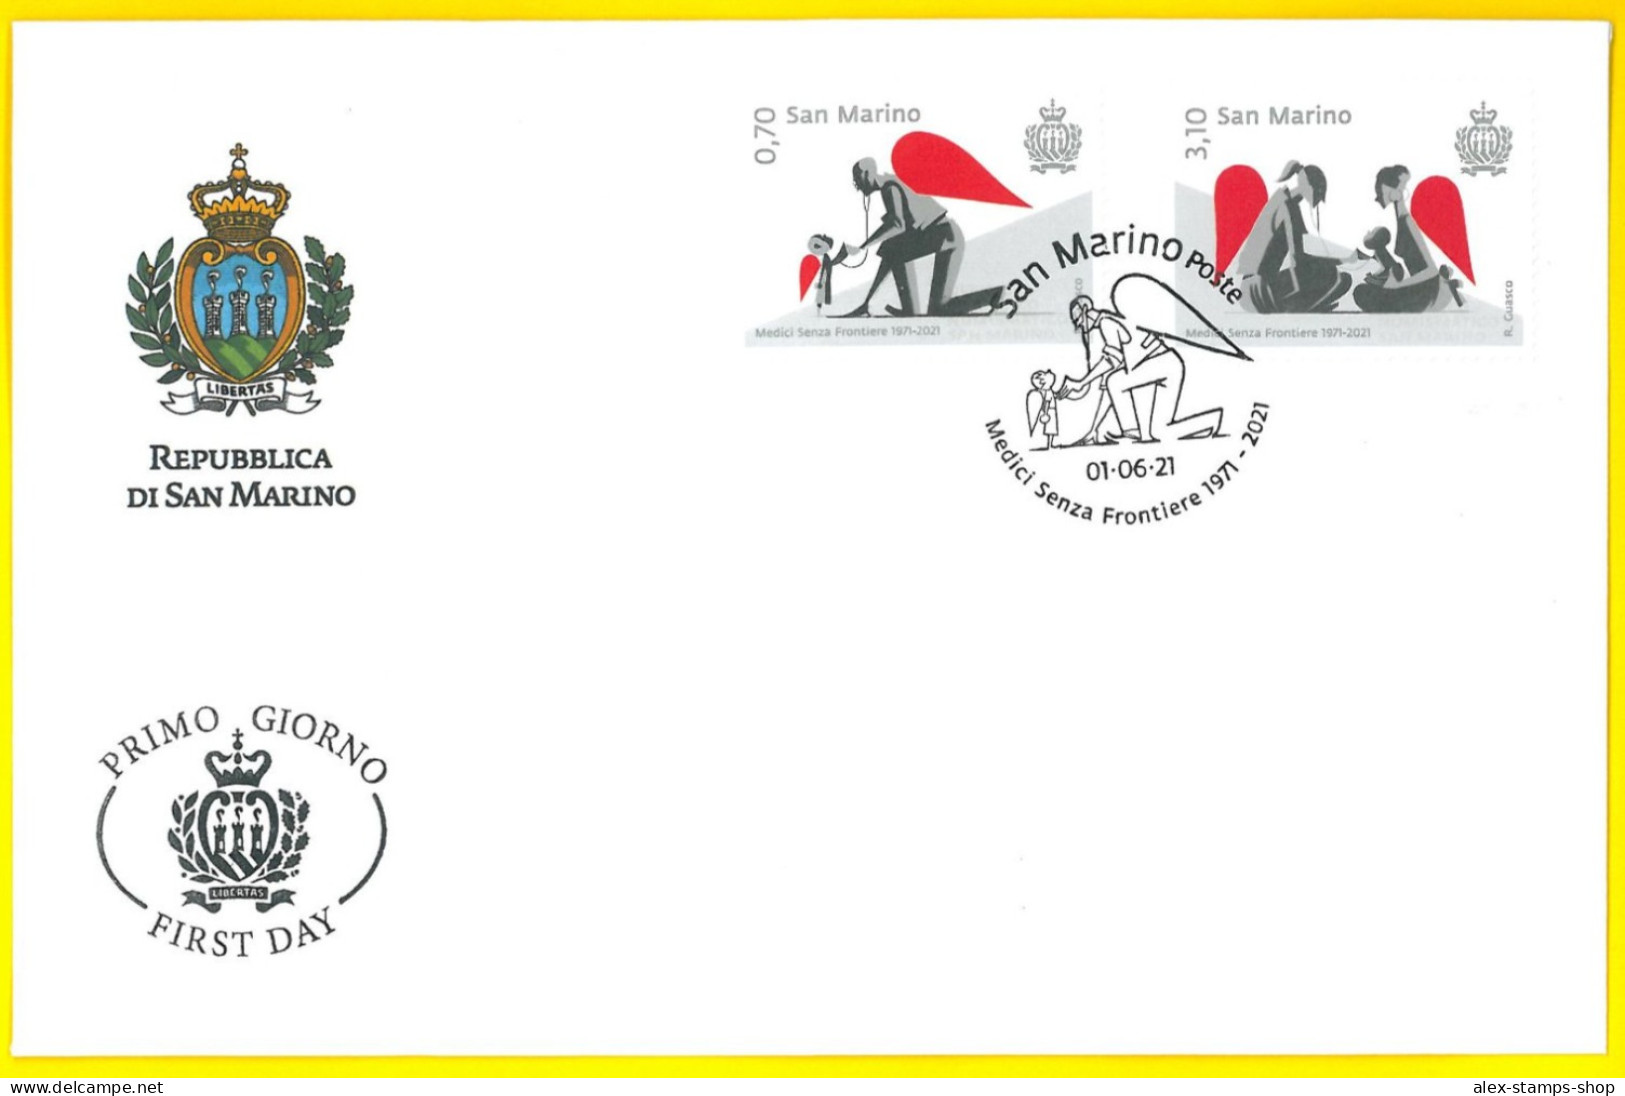 SAN MARINO 2021 FDC 50° Aniversary Medici Senza Frontiere - FIRST DAY COVER - FDC